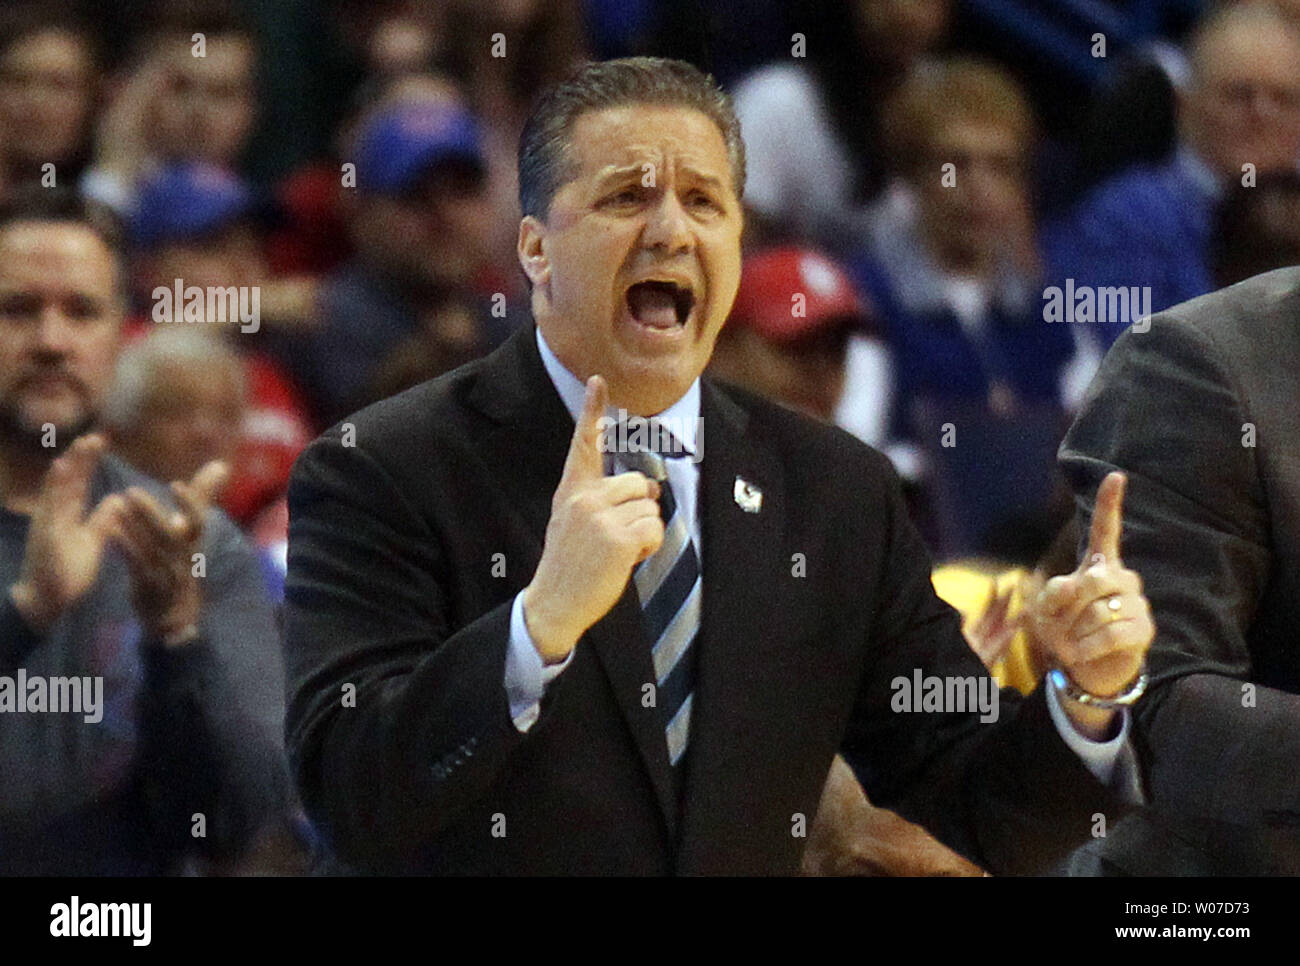 Kentucky Wildcats head basketball coach John Calipari gives his team instructions during the second half against the Wichita State Shockers in the NCAA Division 1 Men's Basketball Championship game at the Scottrade Center in St. Louis on March 23, 2014.   UPI/Bill Greenblatt Stock Photo